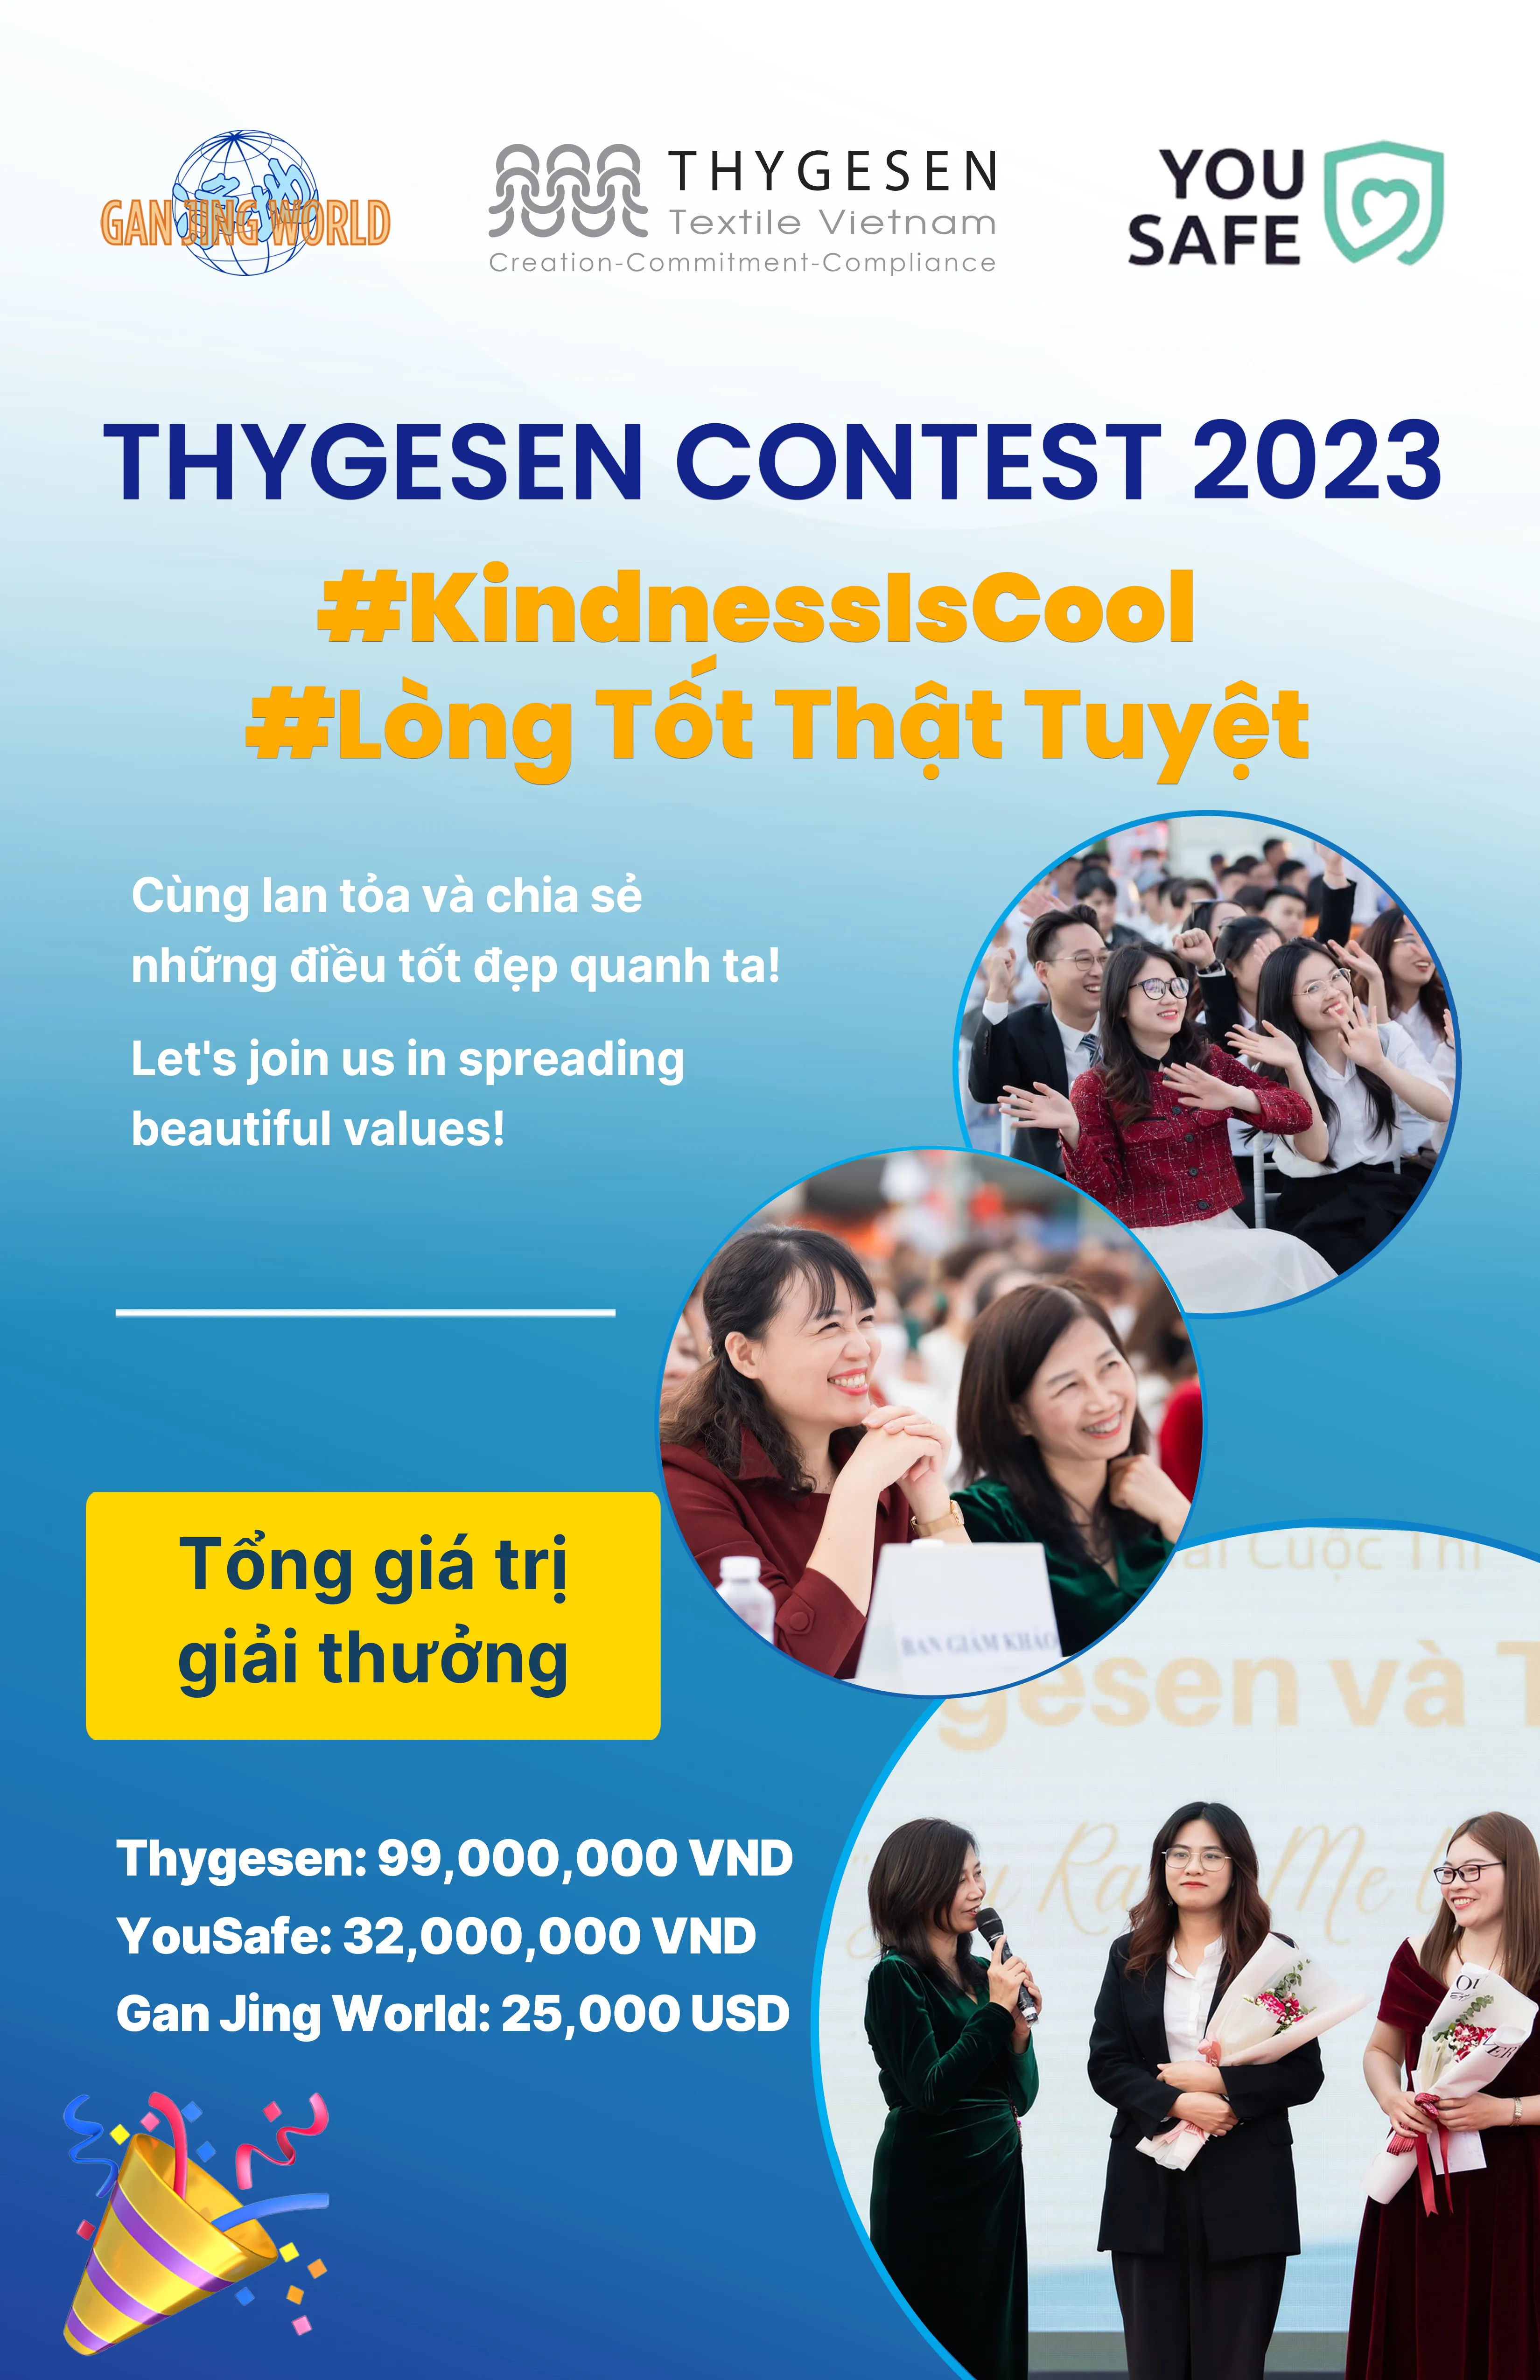 Thygesen Contest 2023 - Kindness Is Cool